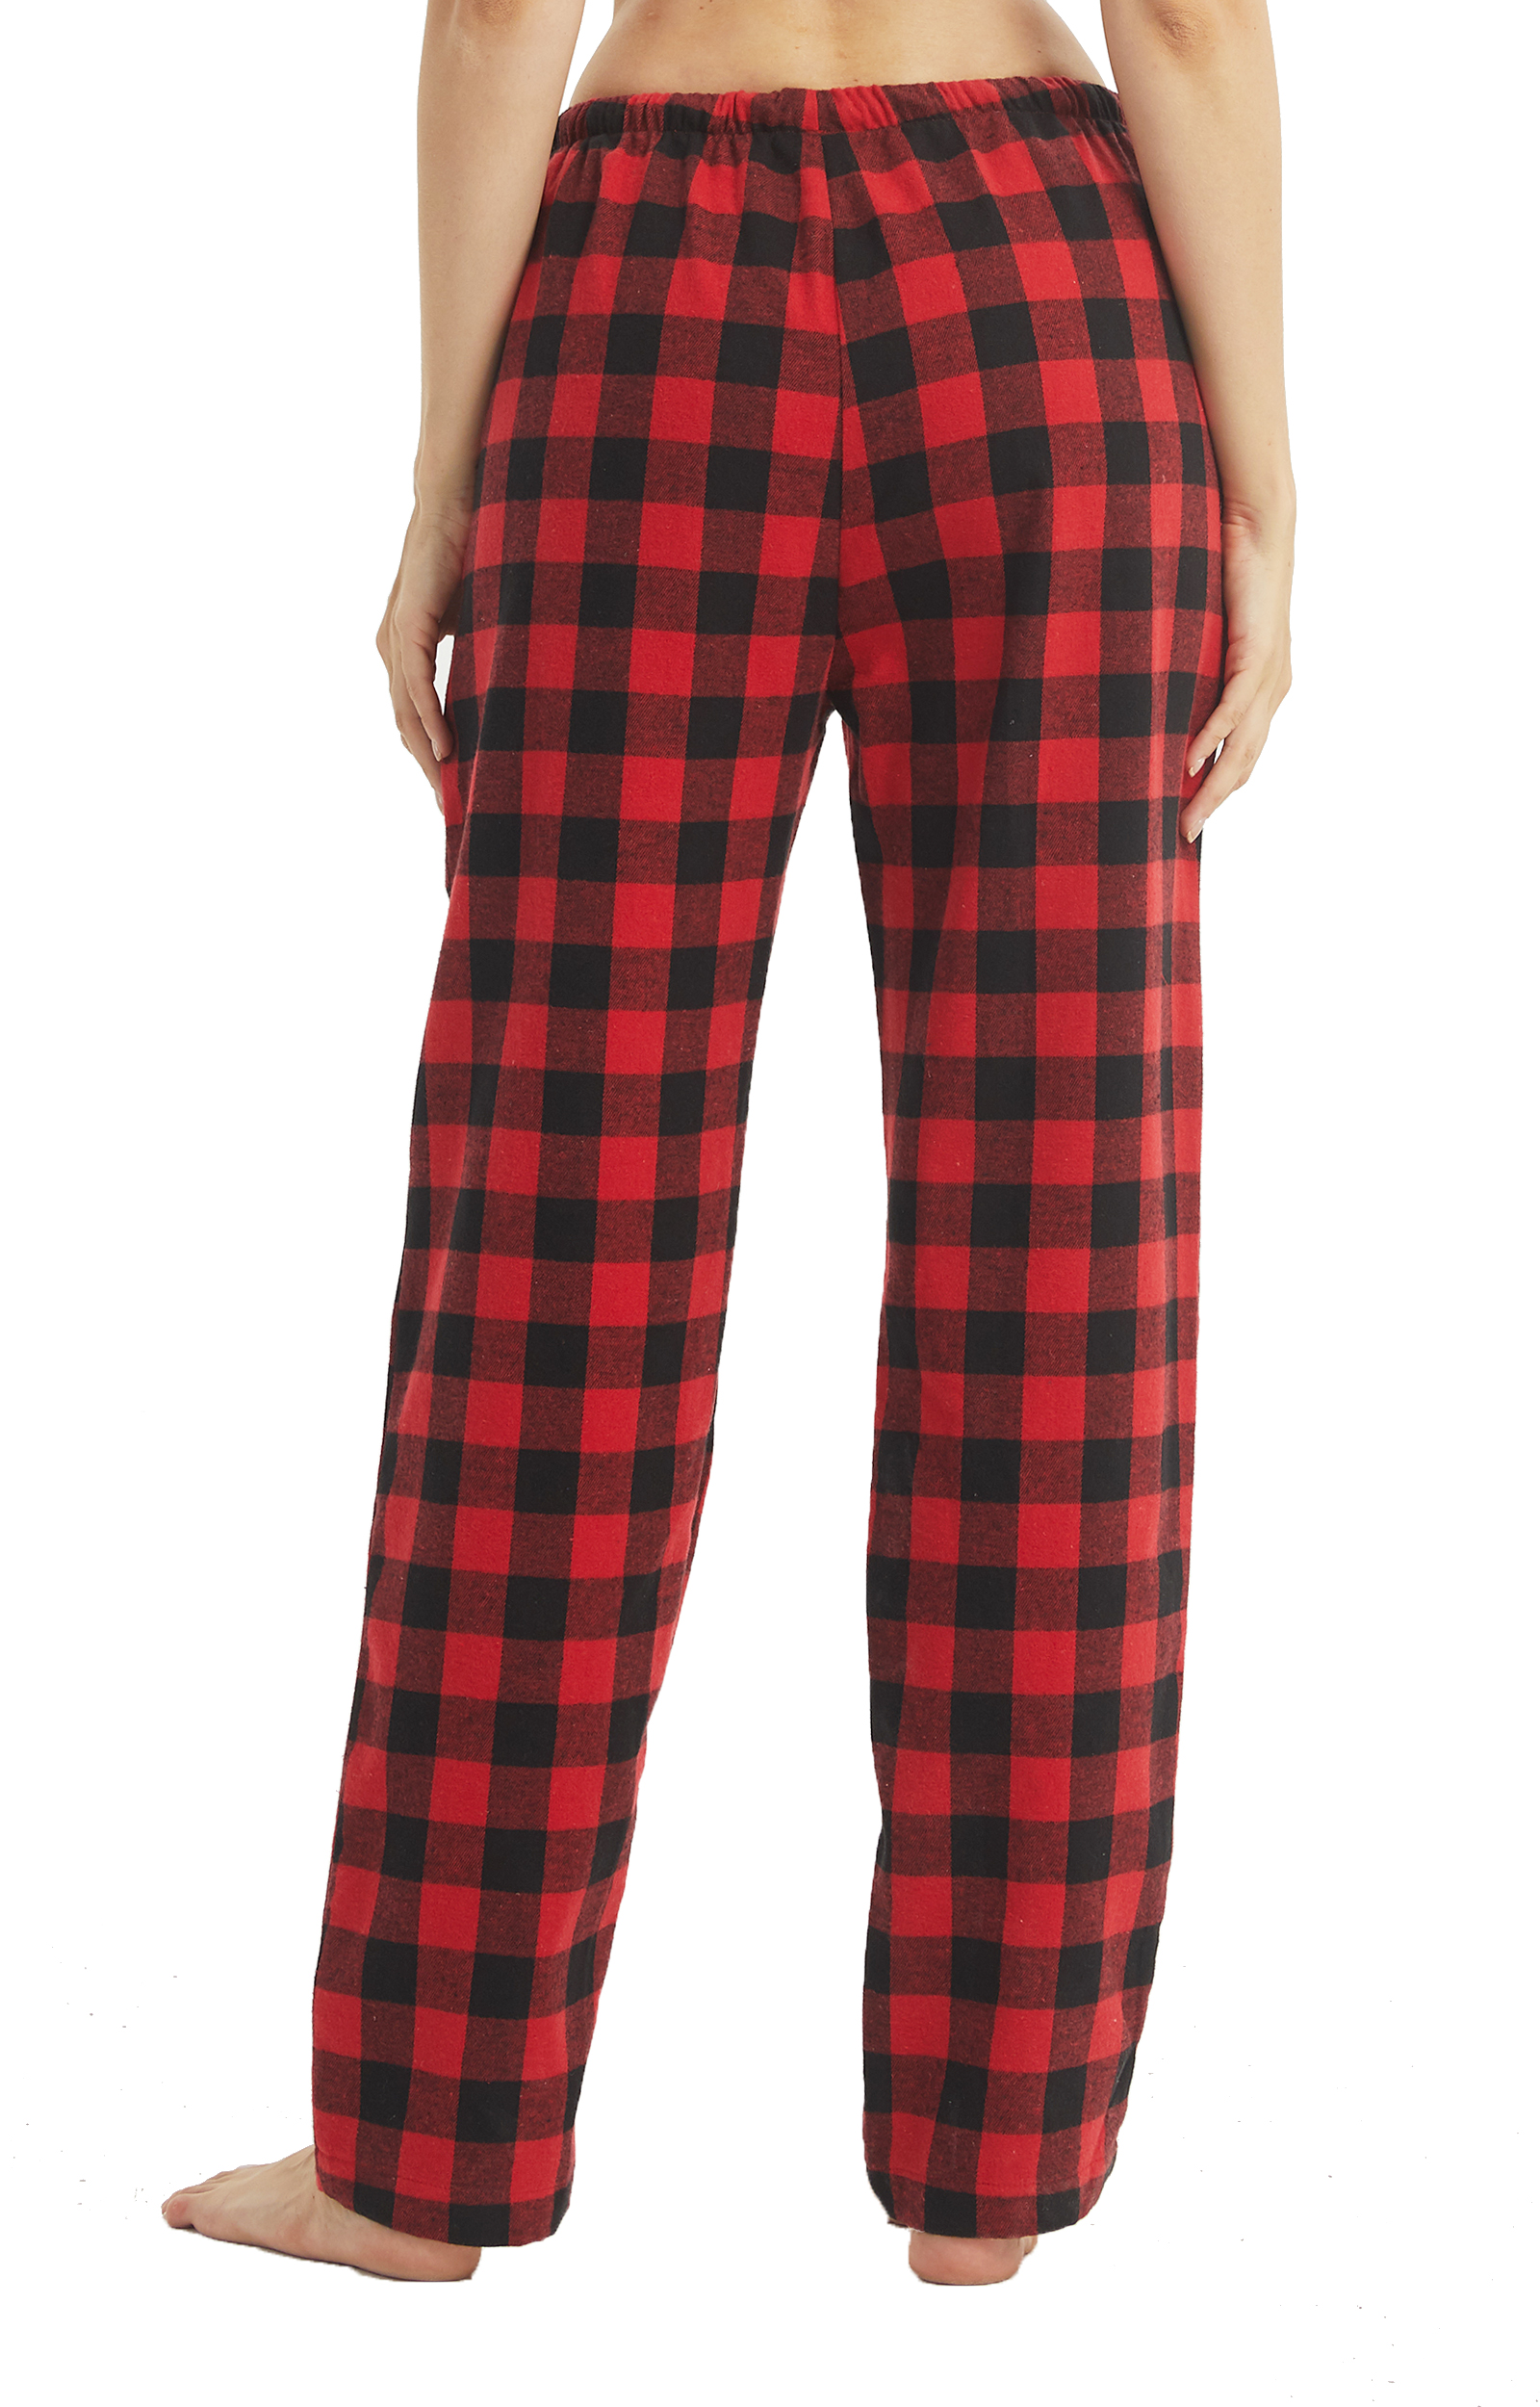 LANBAOSI 2 Pack Womens Plaid Flannel Pajama Pants With Pockets Size L ...